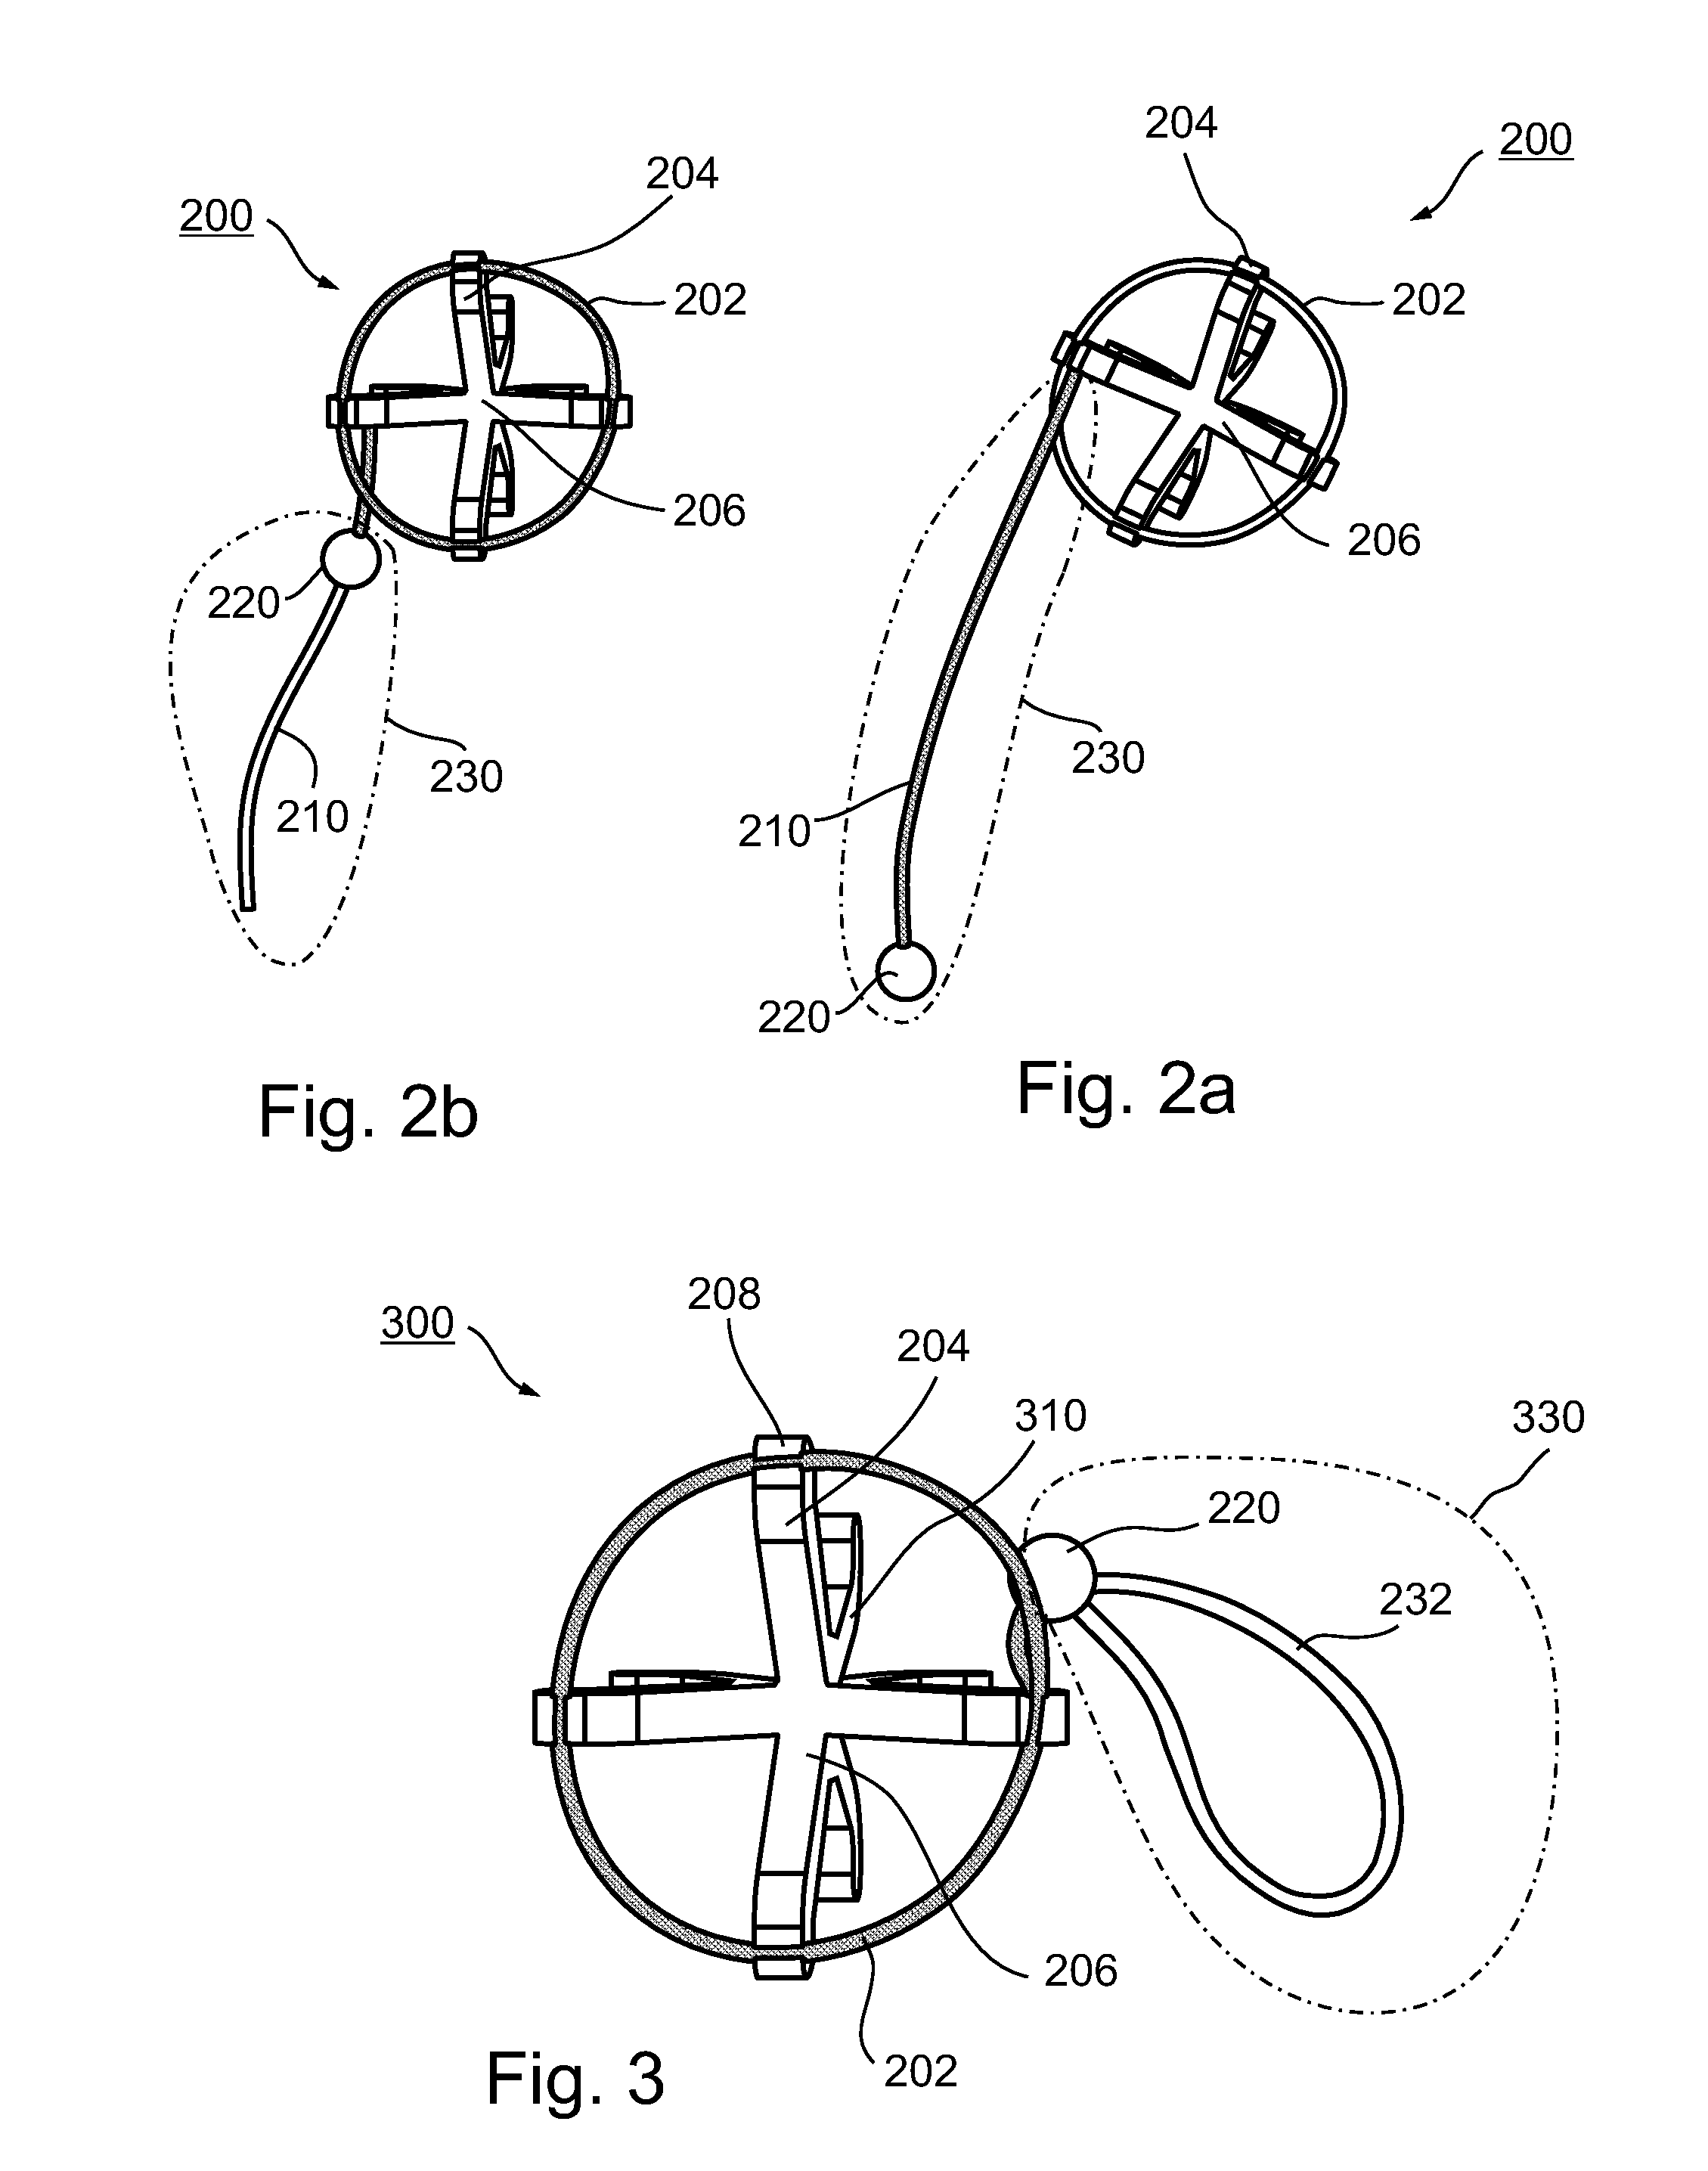 Adjustable tension ring for amelioration of urinary incontinence in females